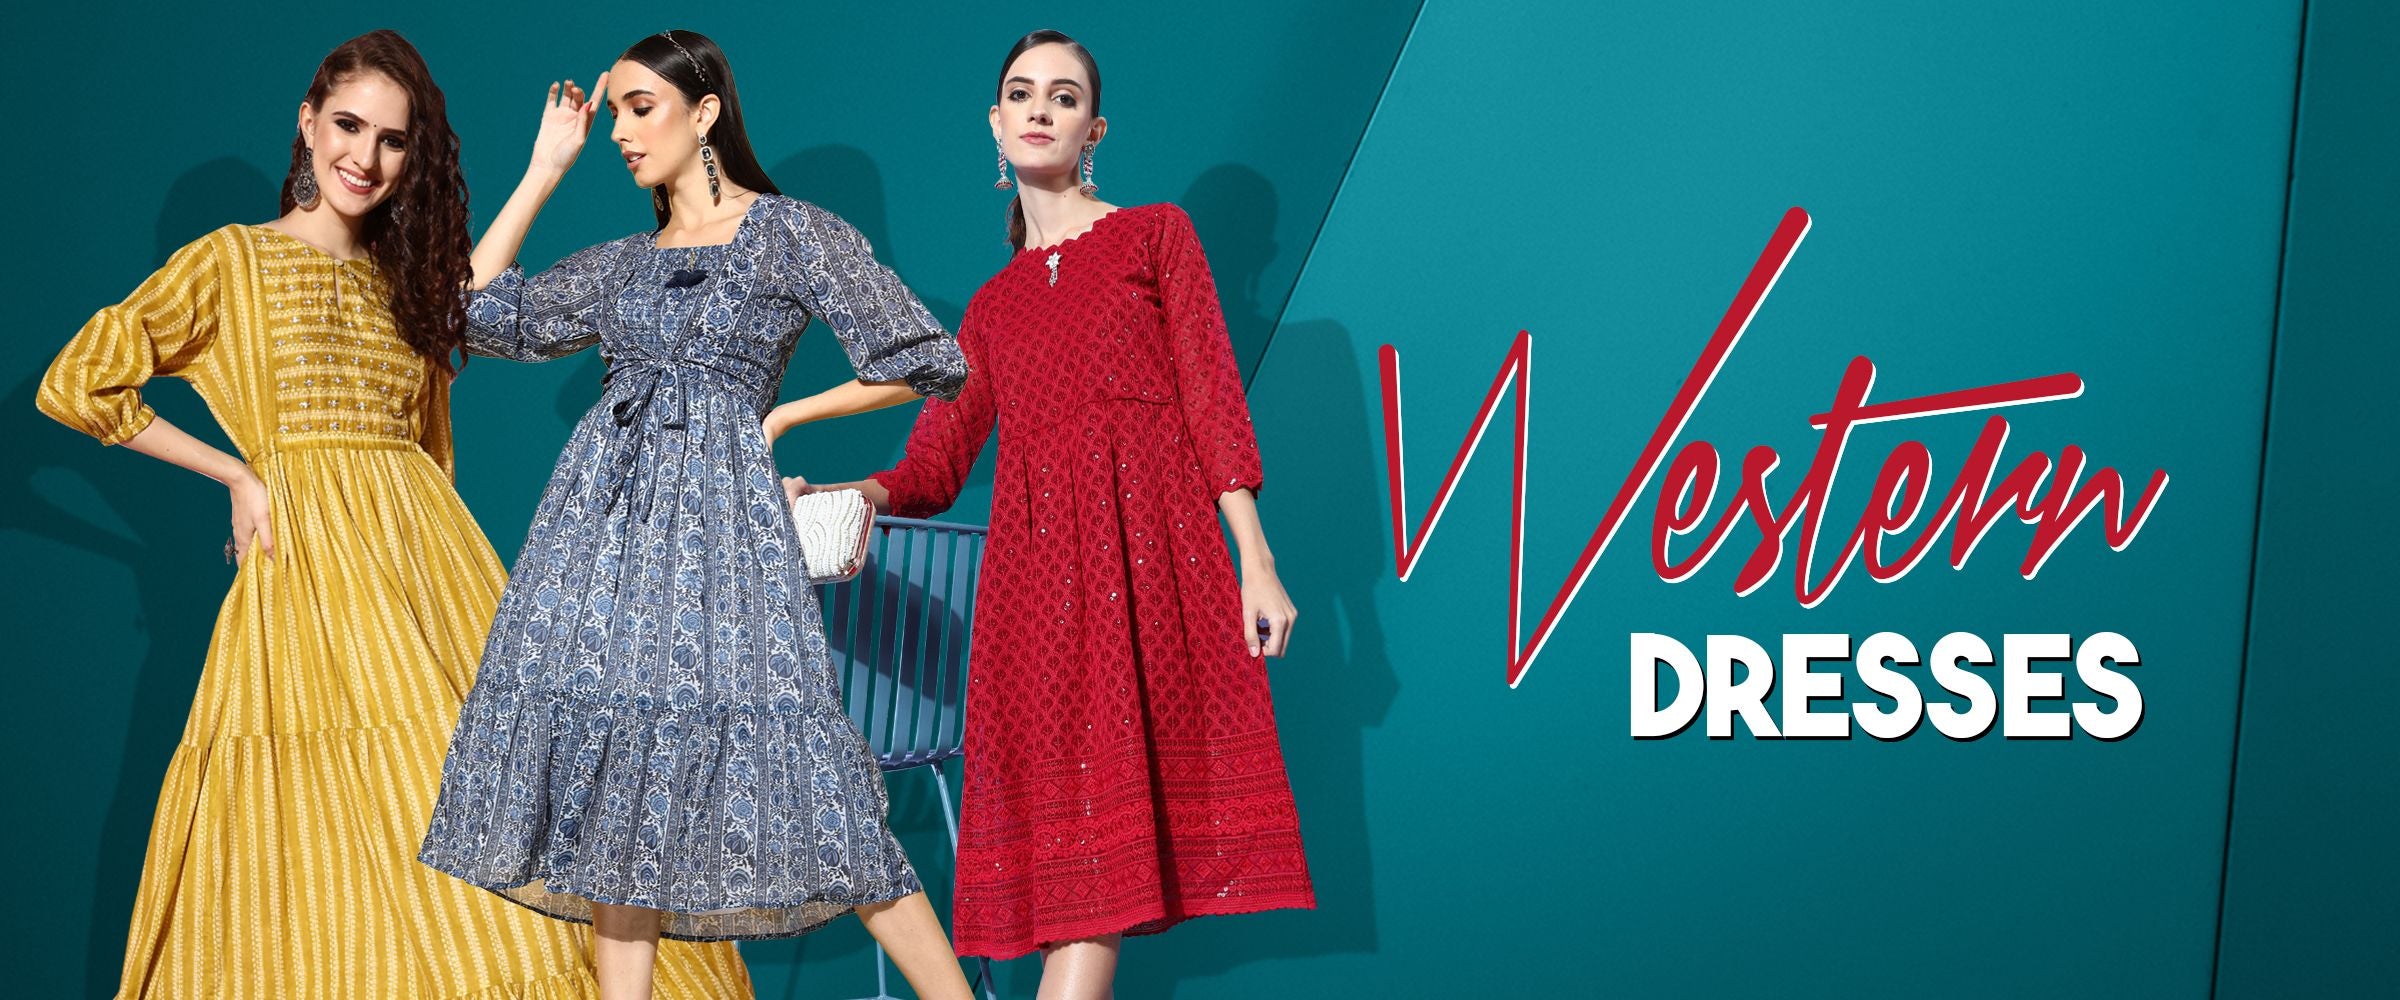 A-Line Dresses - Get upto 60% off on A-Line Dress Online from Myntra